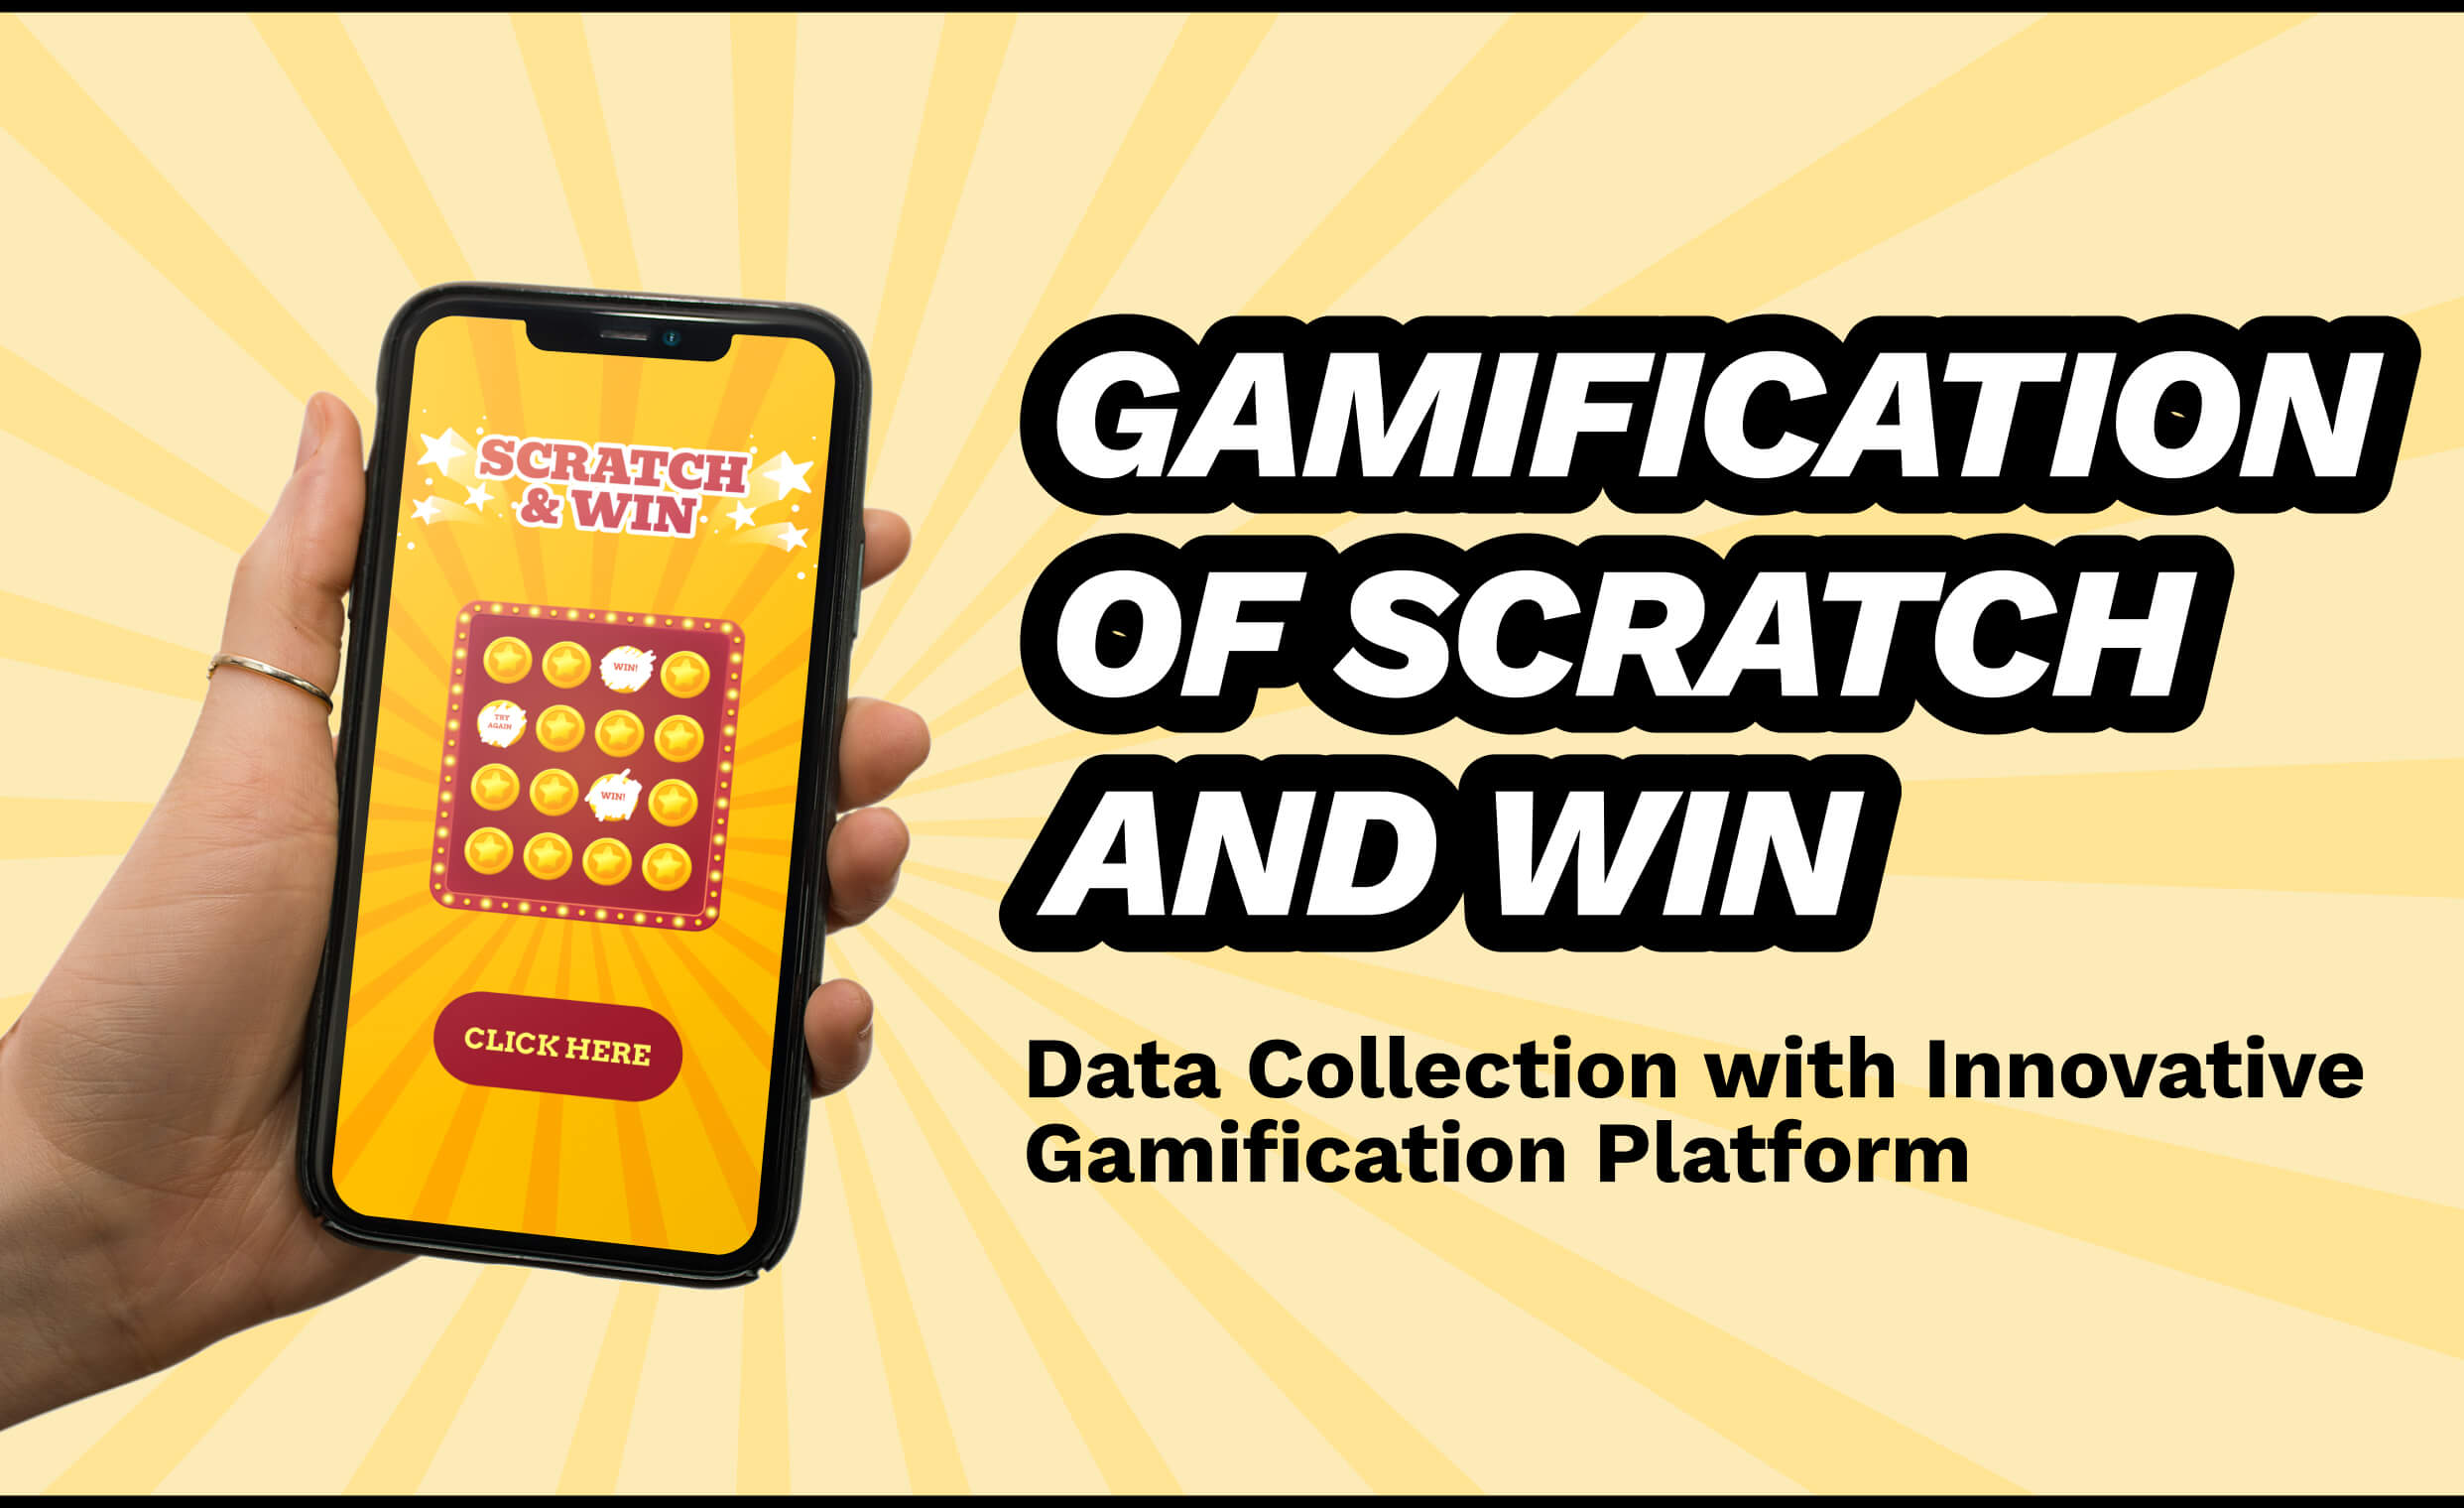 Driving Engagement and Data Collection with Innovative Gamification Platform